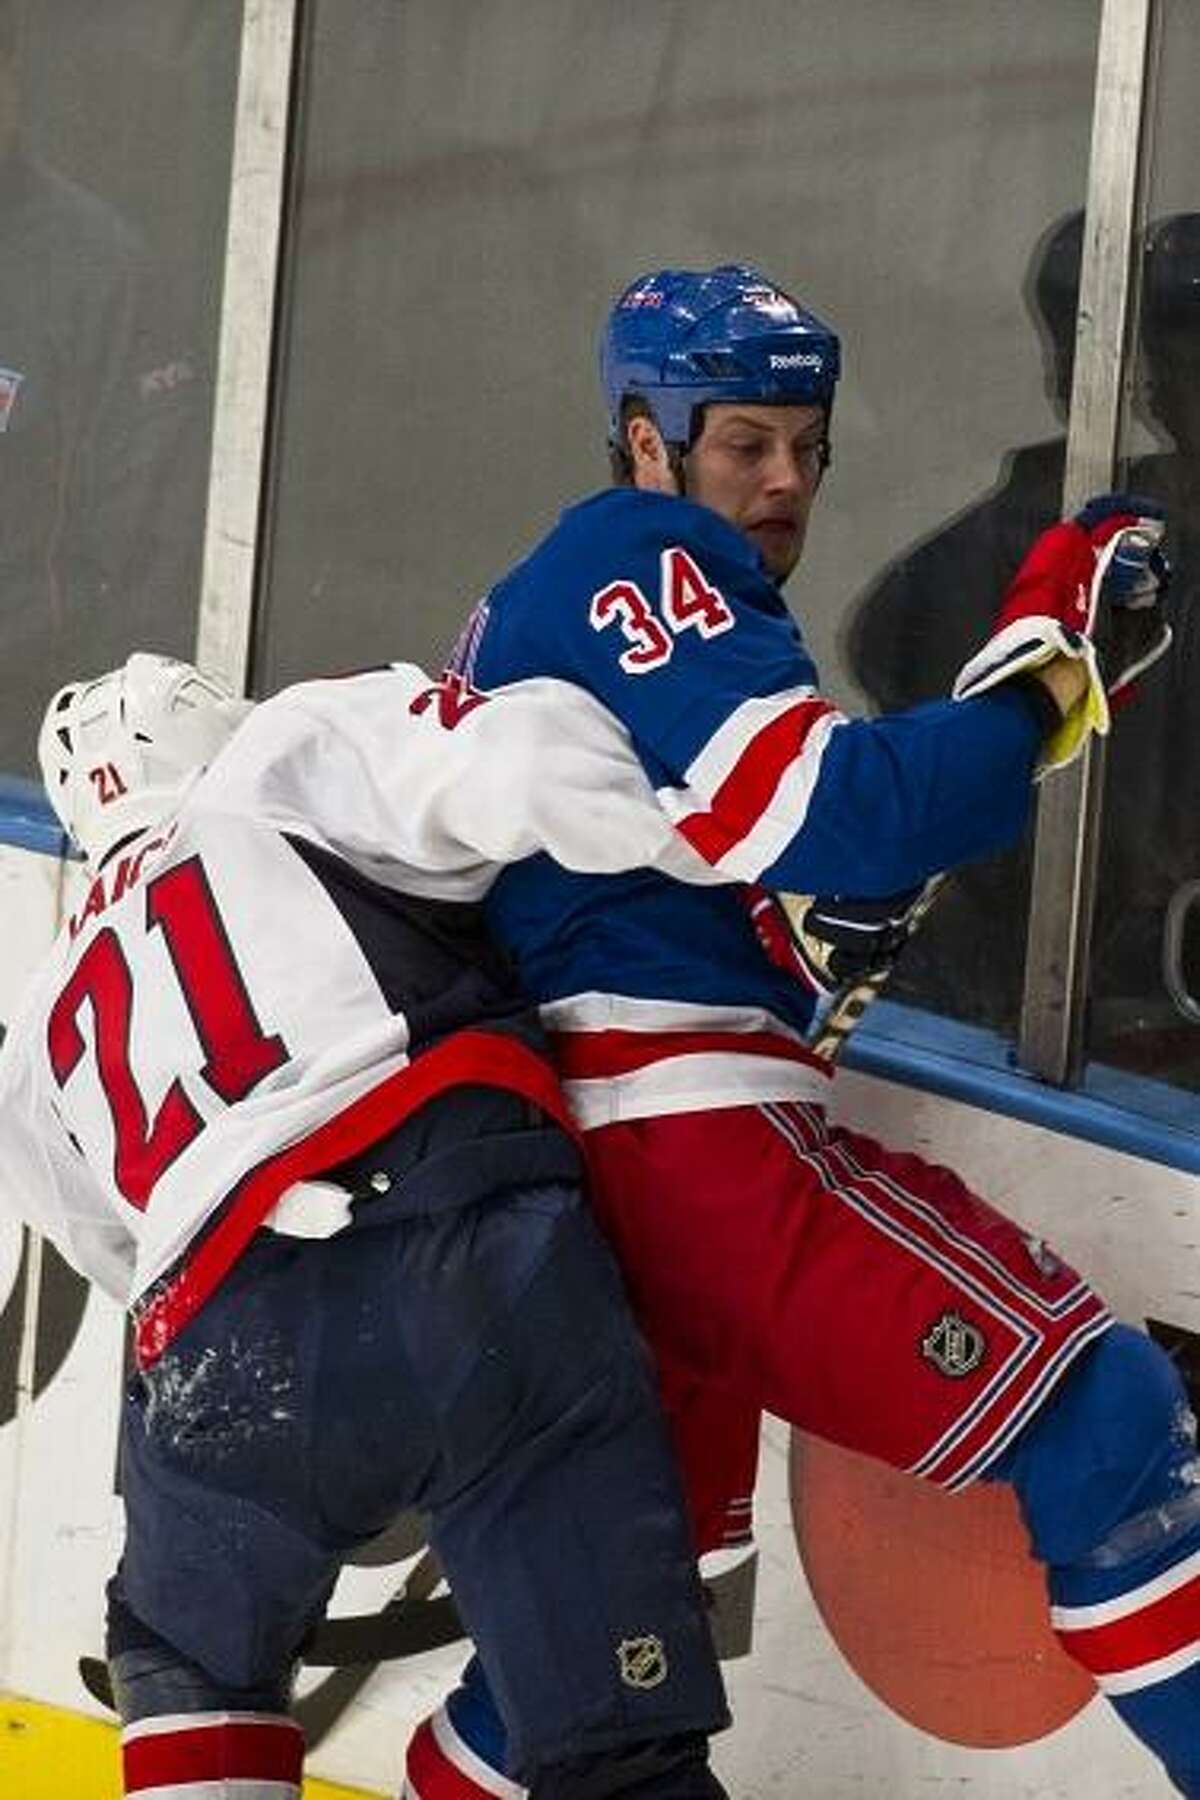 April 30, 2012: Washington Capitals center Brooks Laich (21) drives New York Rangers center John Mitchell (34) into the boards during game 2 of the Eastern Conference Semi Finals at Madison Square Garden in Manhattan, New York . (Cal Sport Media via AP Images)